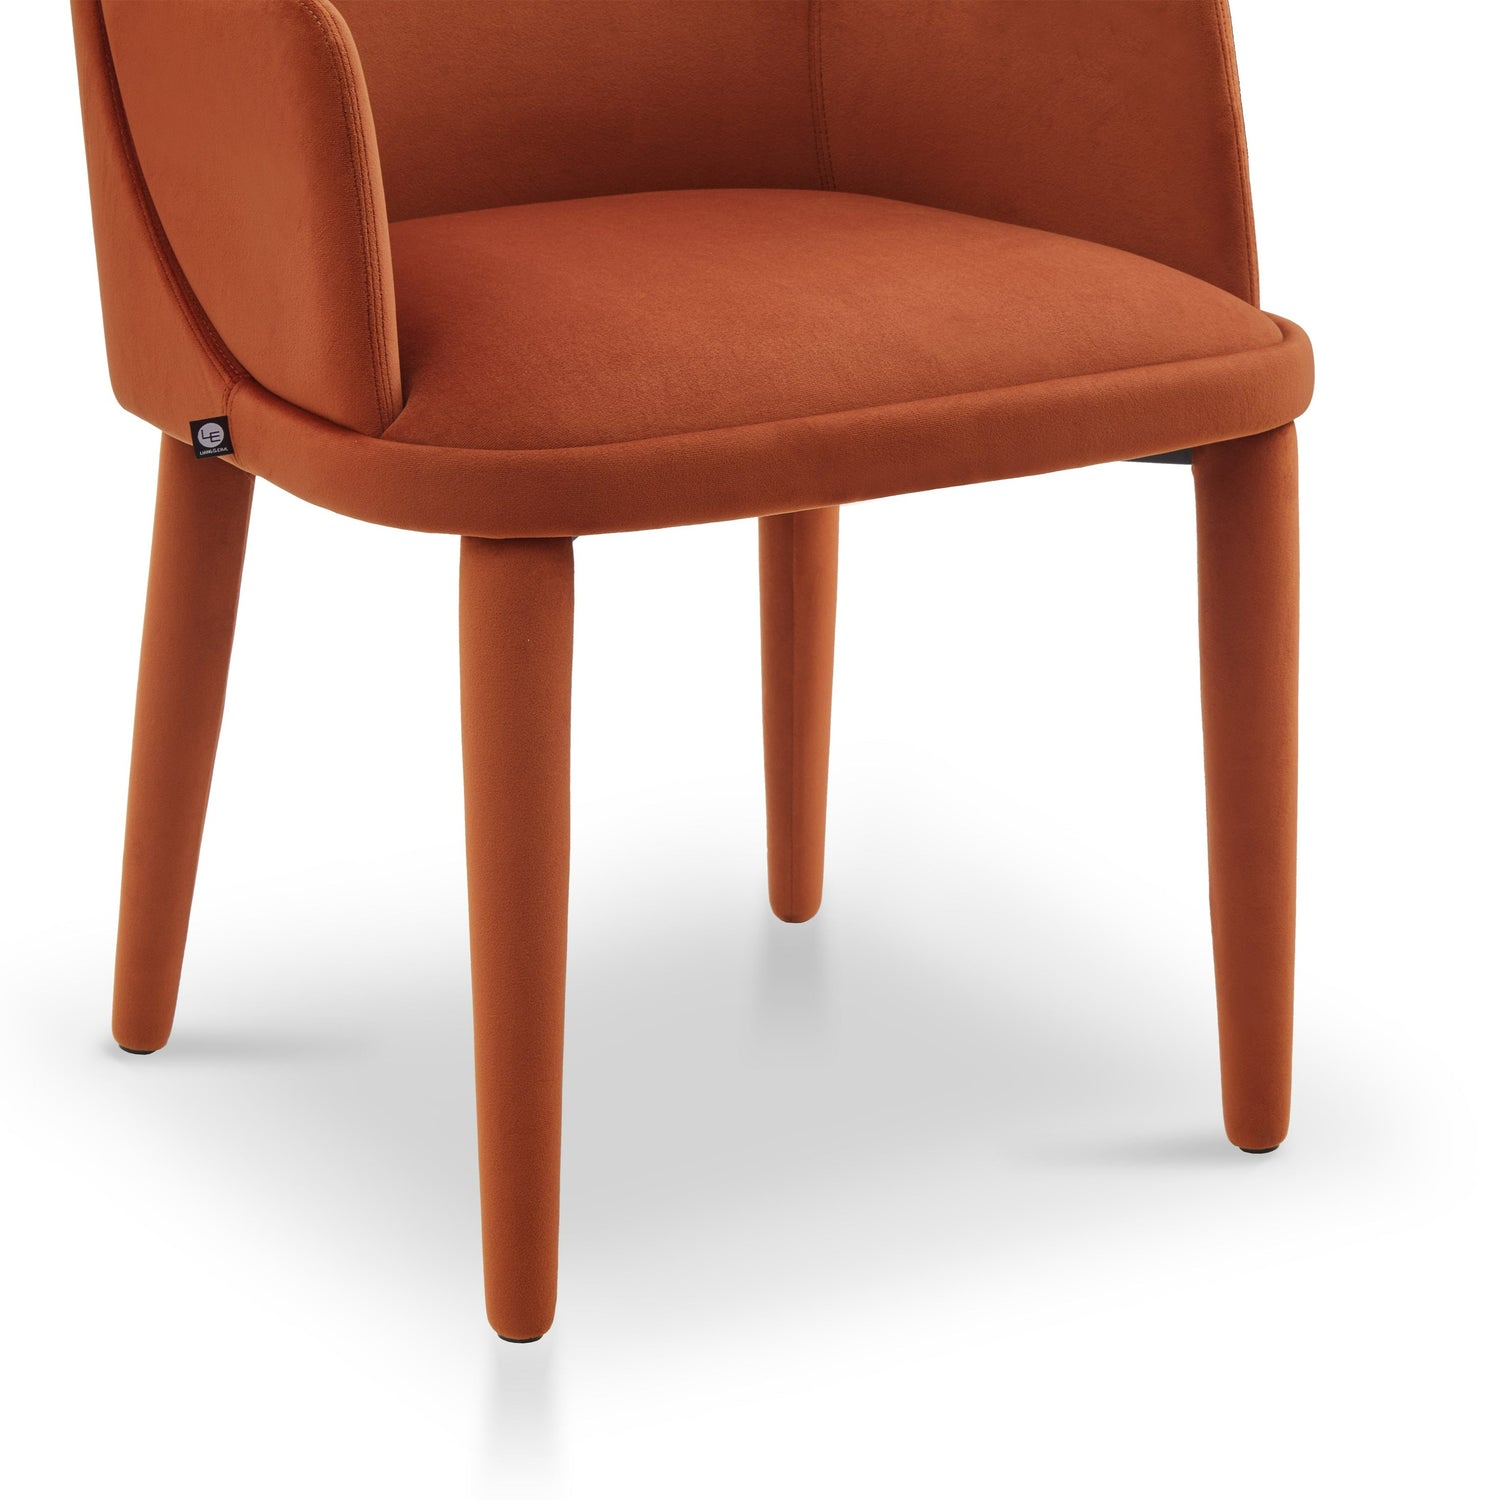  LiangAndEimil-Liang & Eimil Diva Dining Chair with Arms in Kaster Crimson Red-Orange 221 